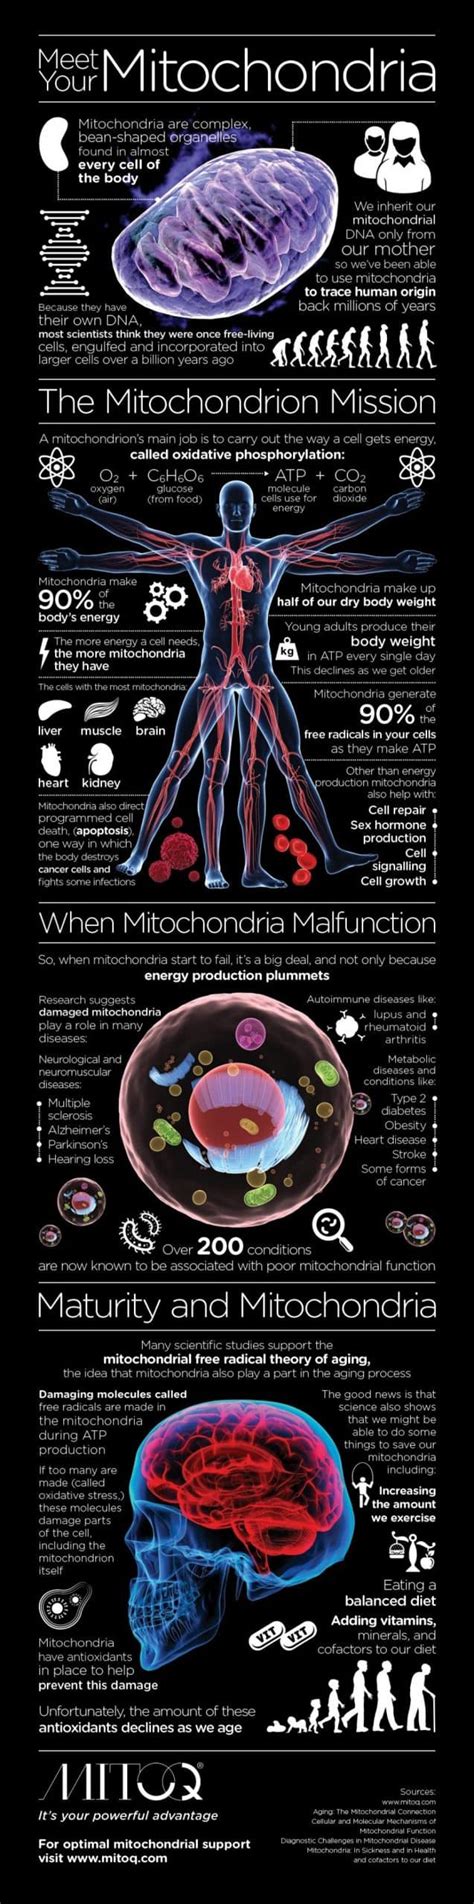 The Mitochondria Is The Powerhouse Of The Cell And Other Facts